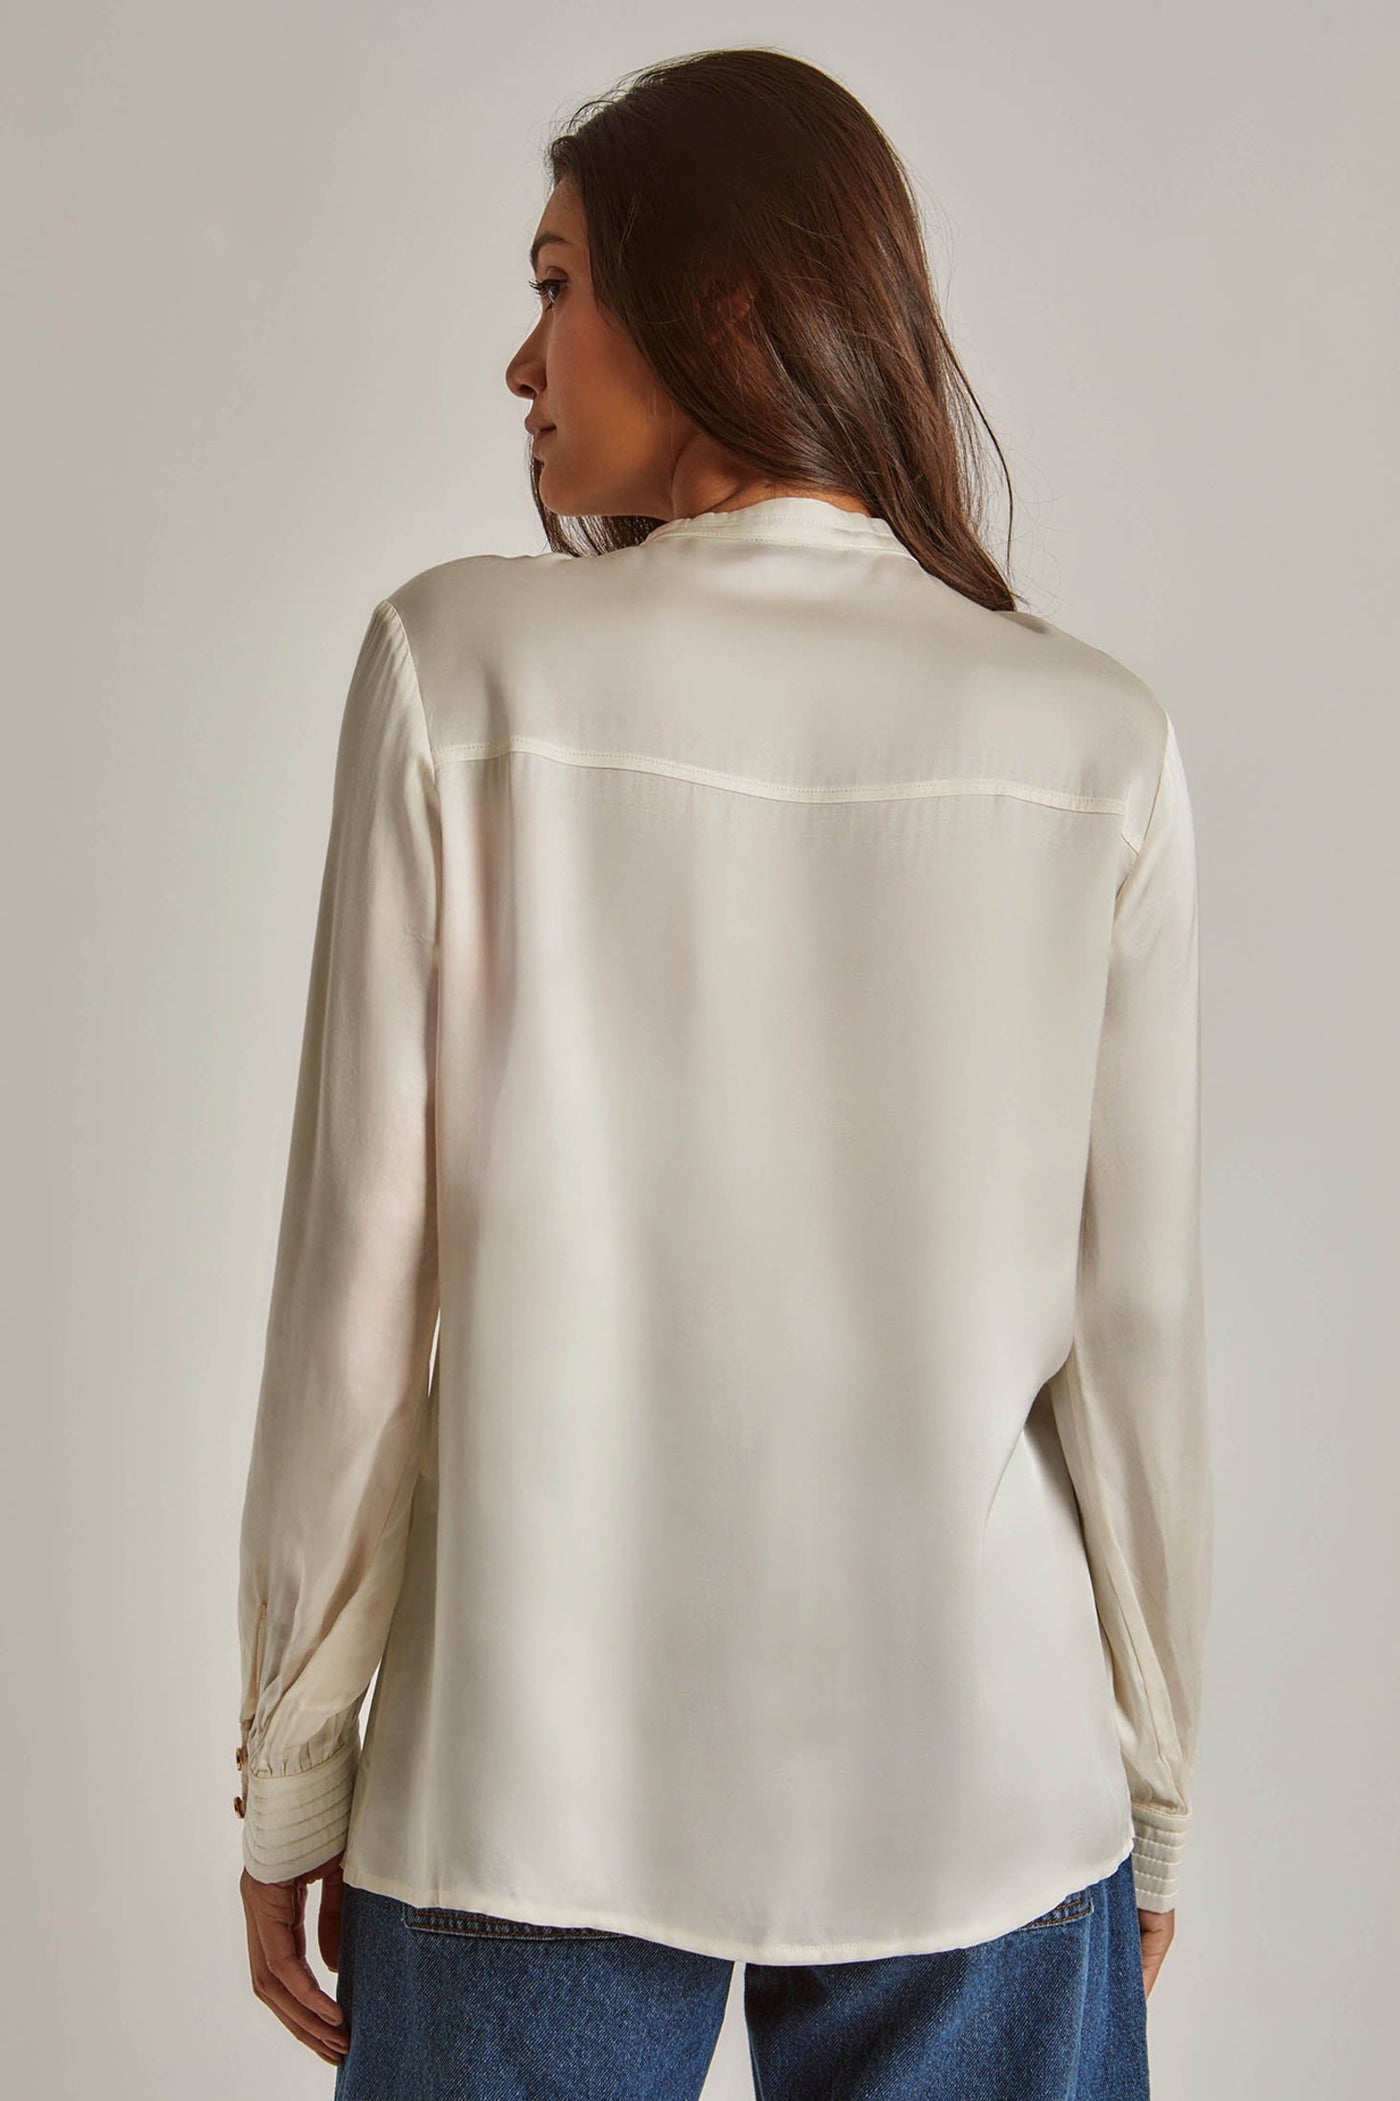 Blouse - Front Button - Long Sleeves